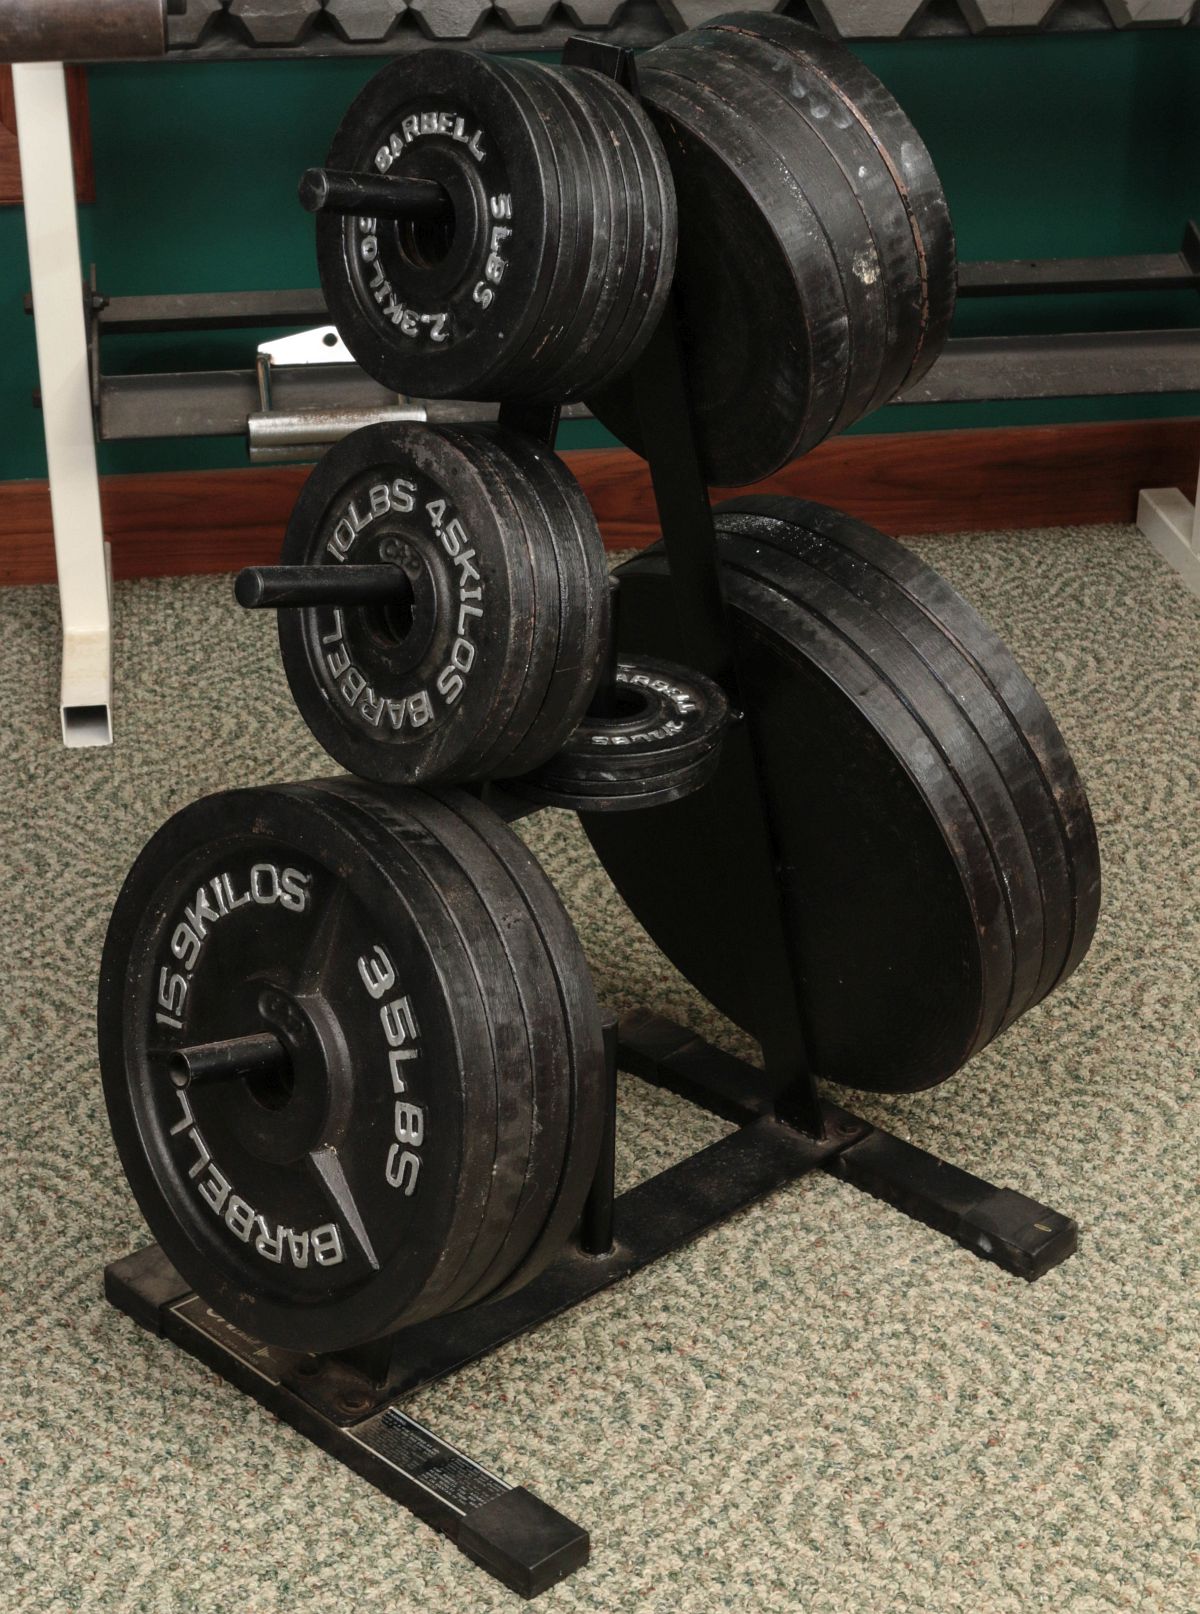 BARBELL FREE WEIGHT SET WITH RACK